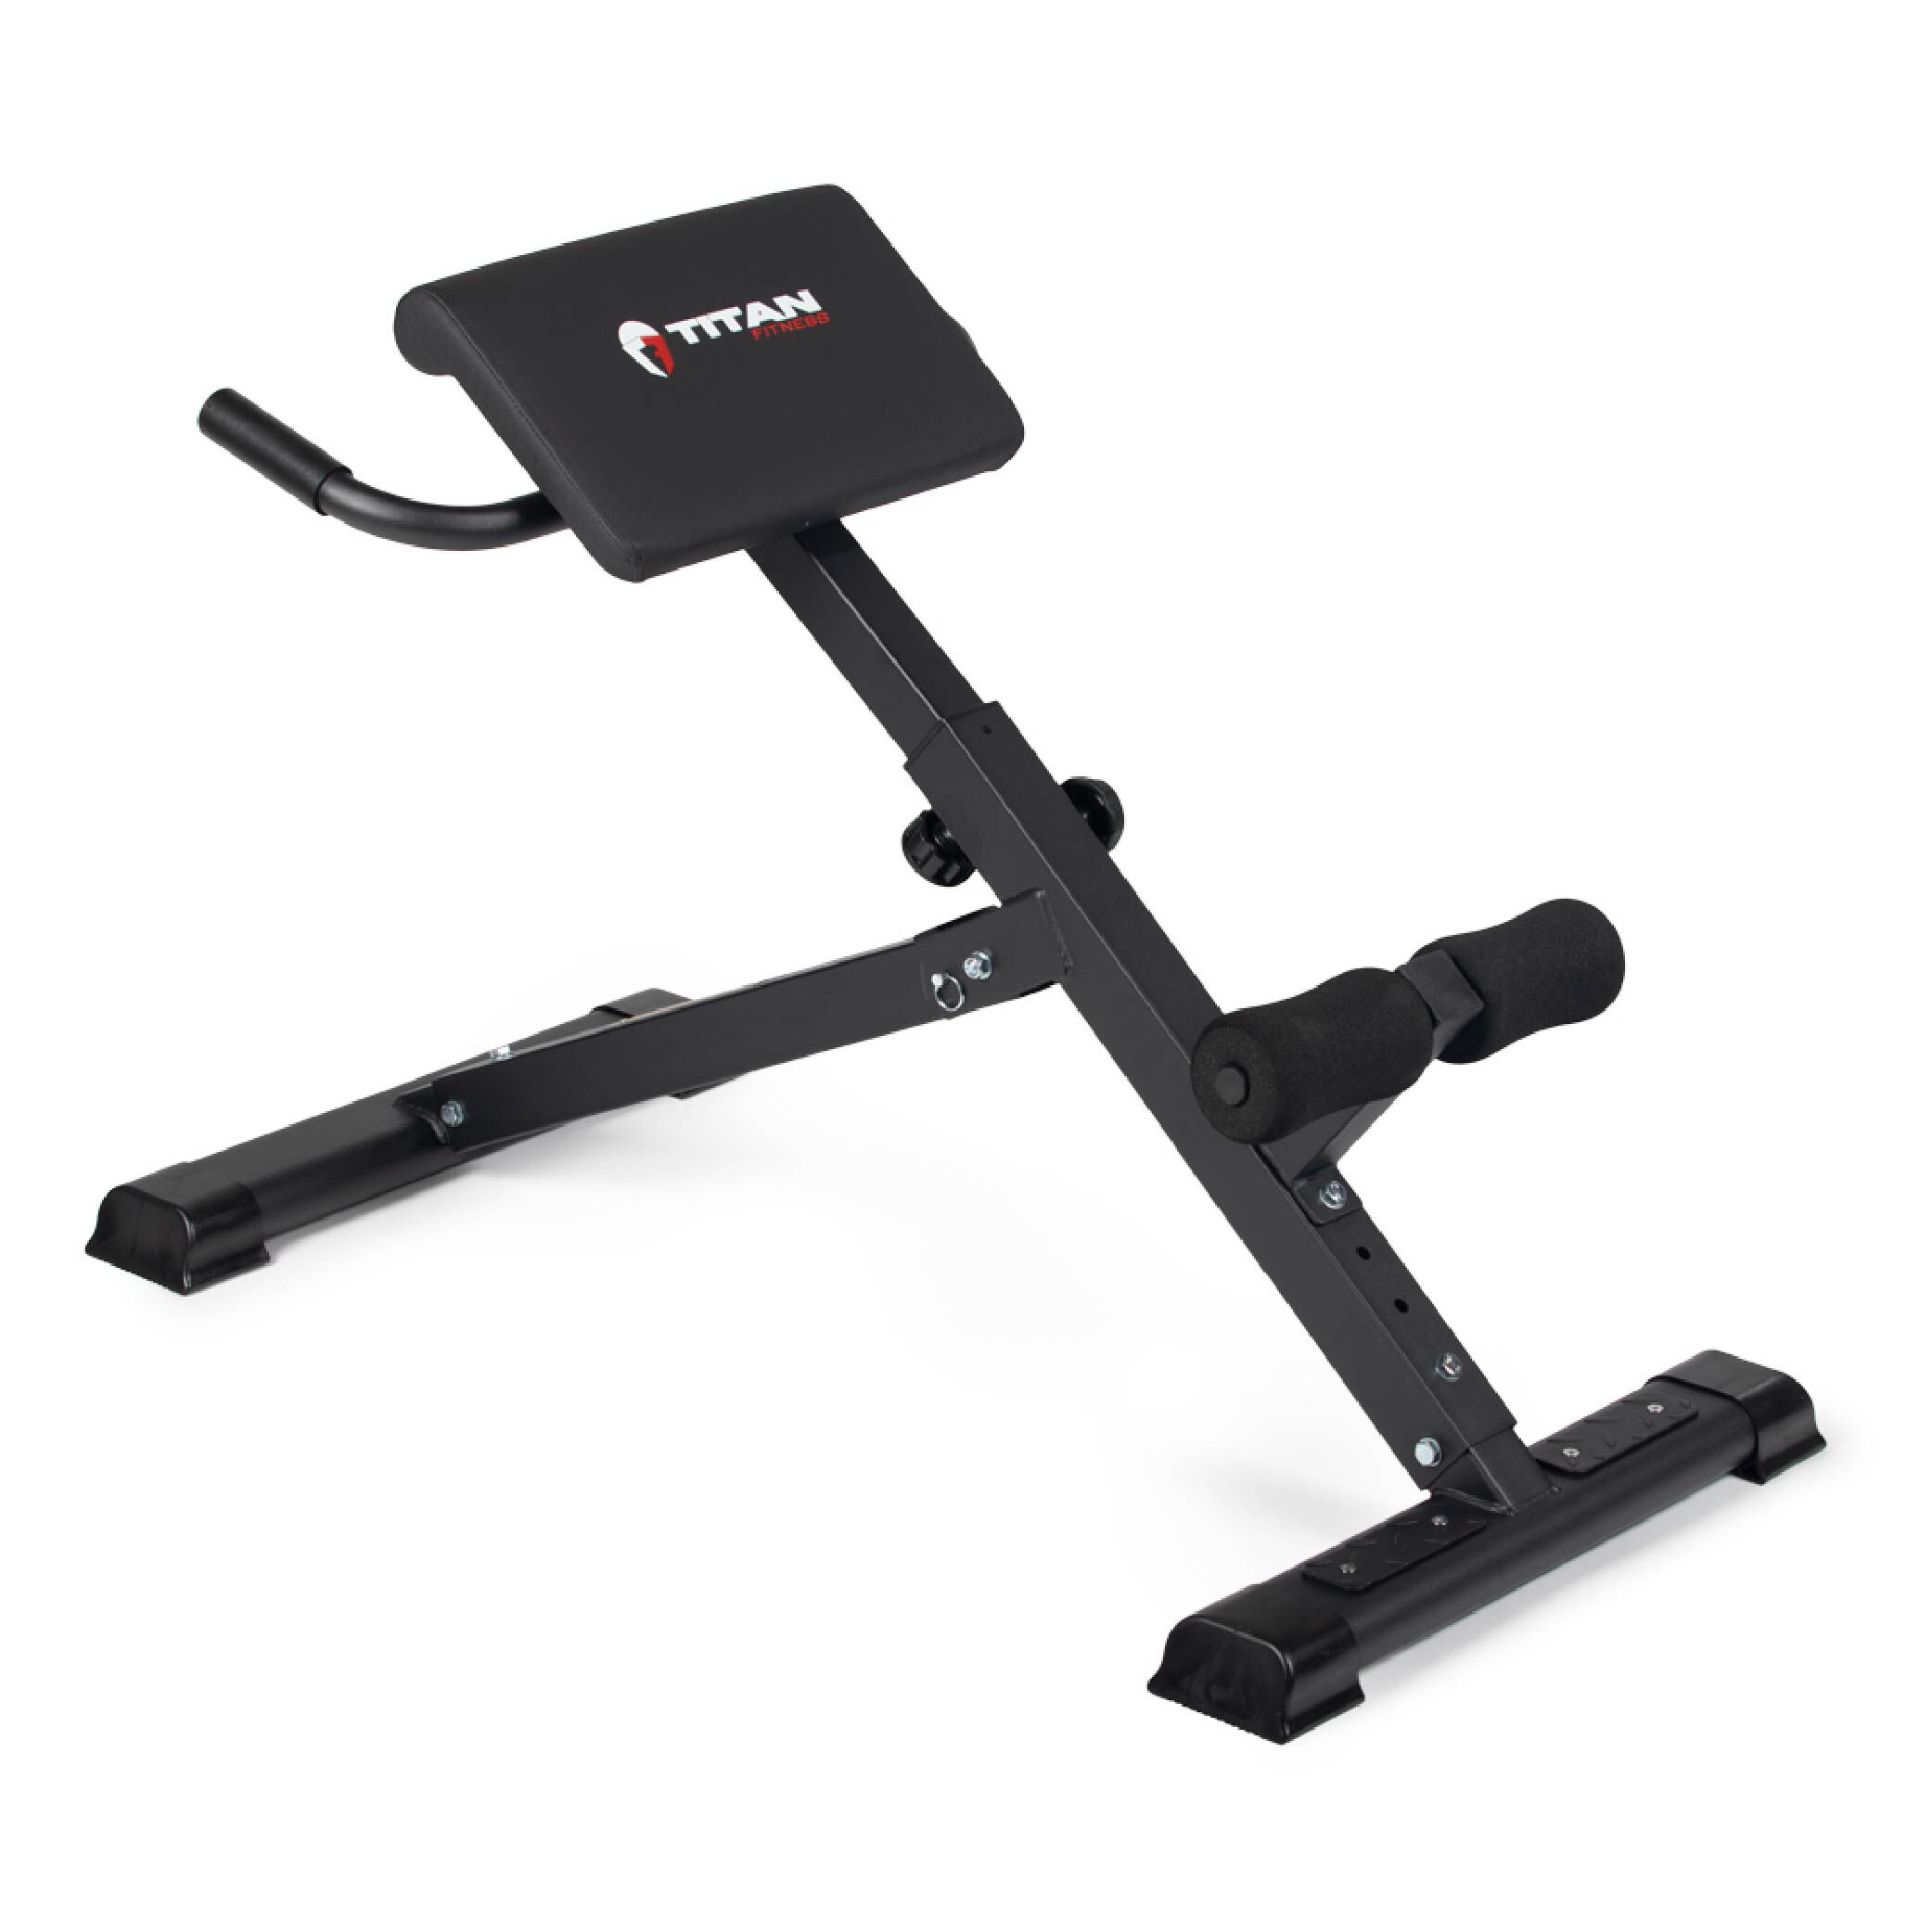 Details about   Foldable AB/Hyper Back Bench Adjustable Extension Wrist Exercise Roman Chair 